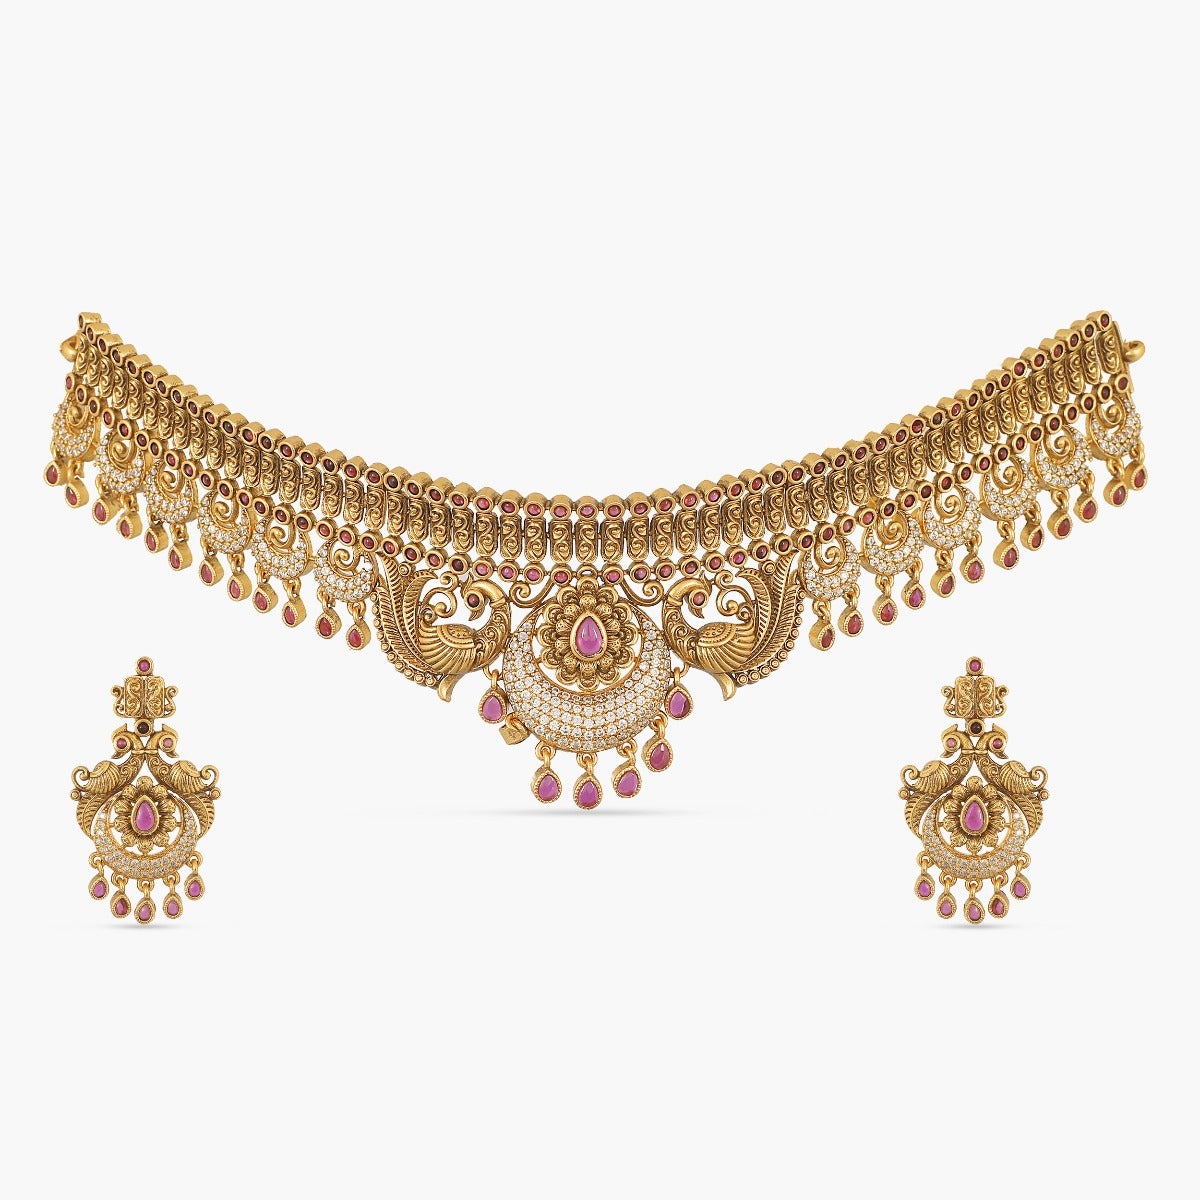 Explore Choker Necklace Collection for at Tarinika